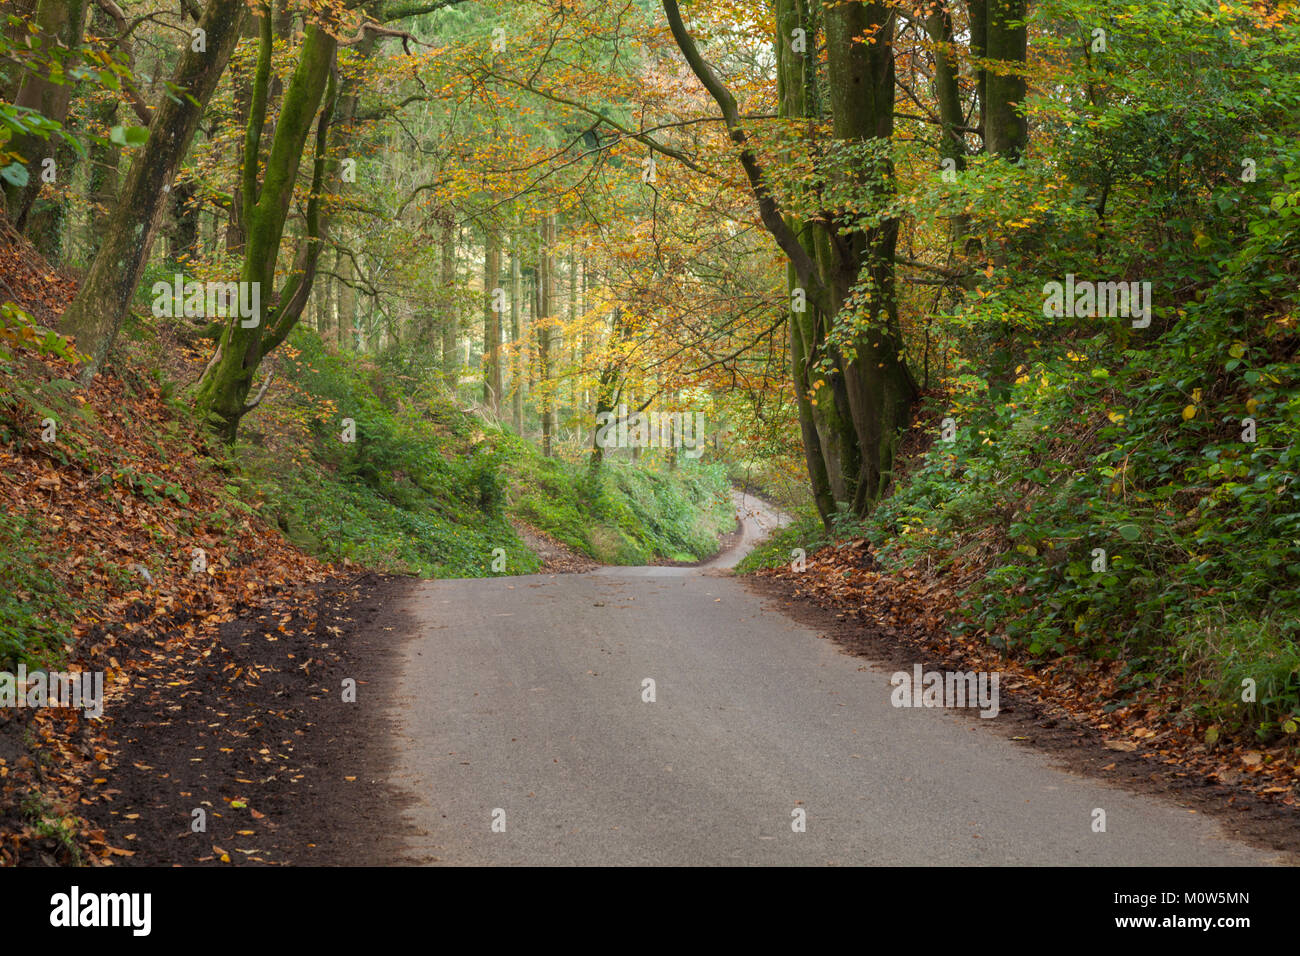 A winding country road enclosed by autumn woodland near Stourhead, on the Somerset and Wiltshire border, England. Stock Photo